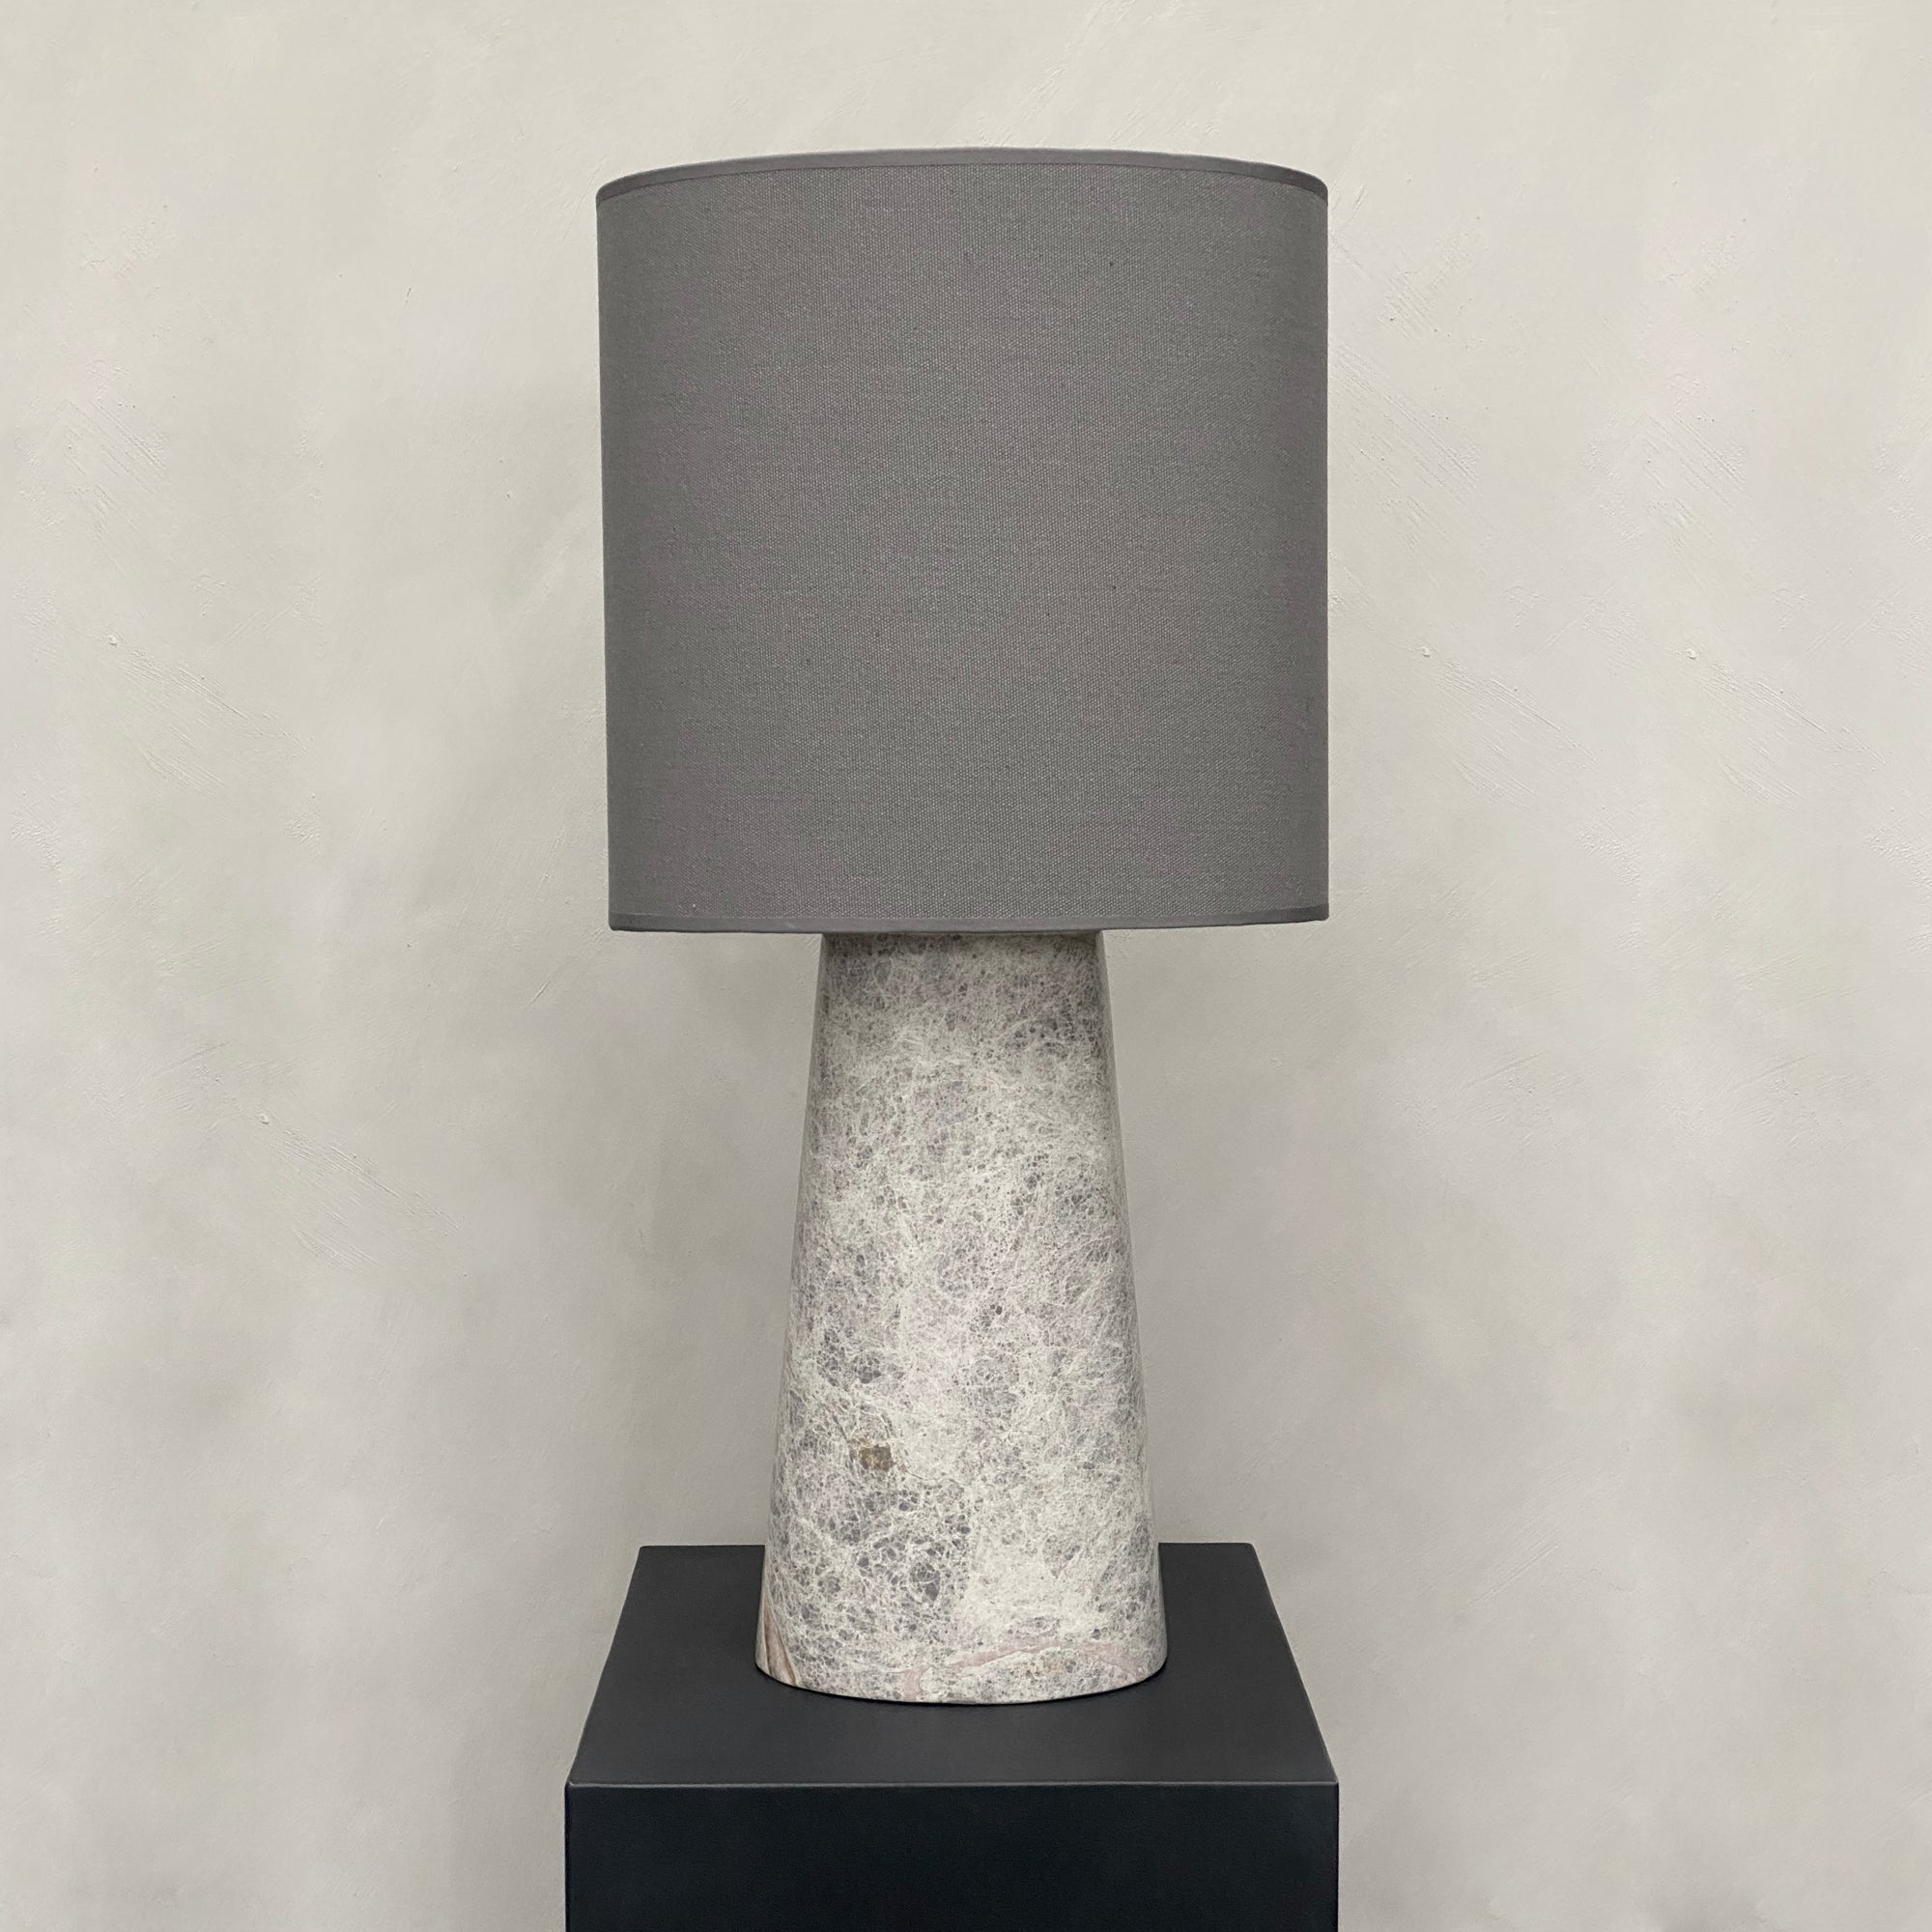 BRANDT Collective VERSO S marble table lamp in Castle Grey